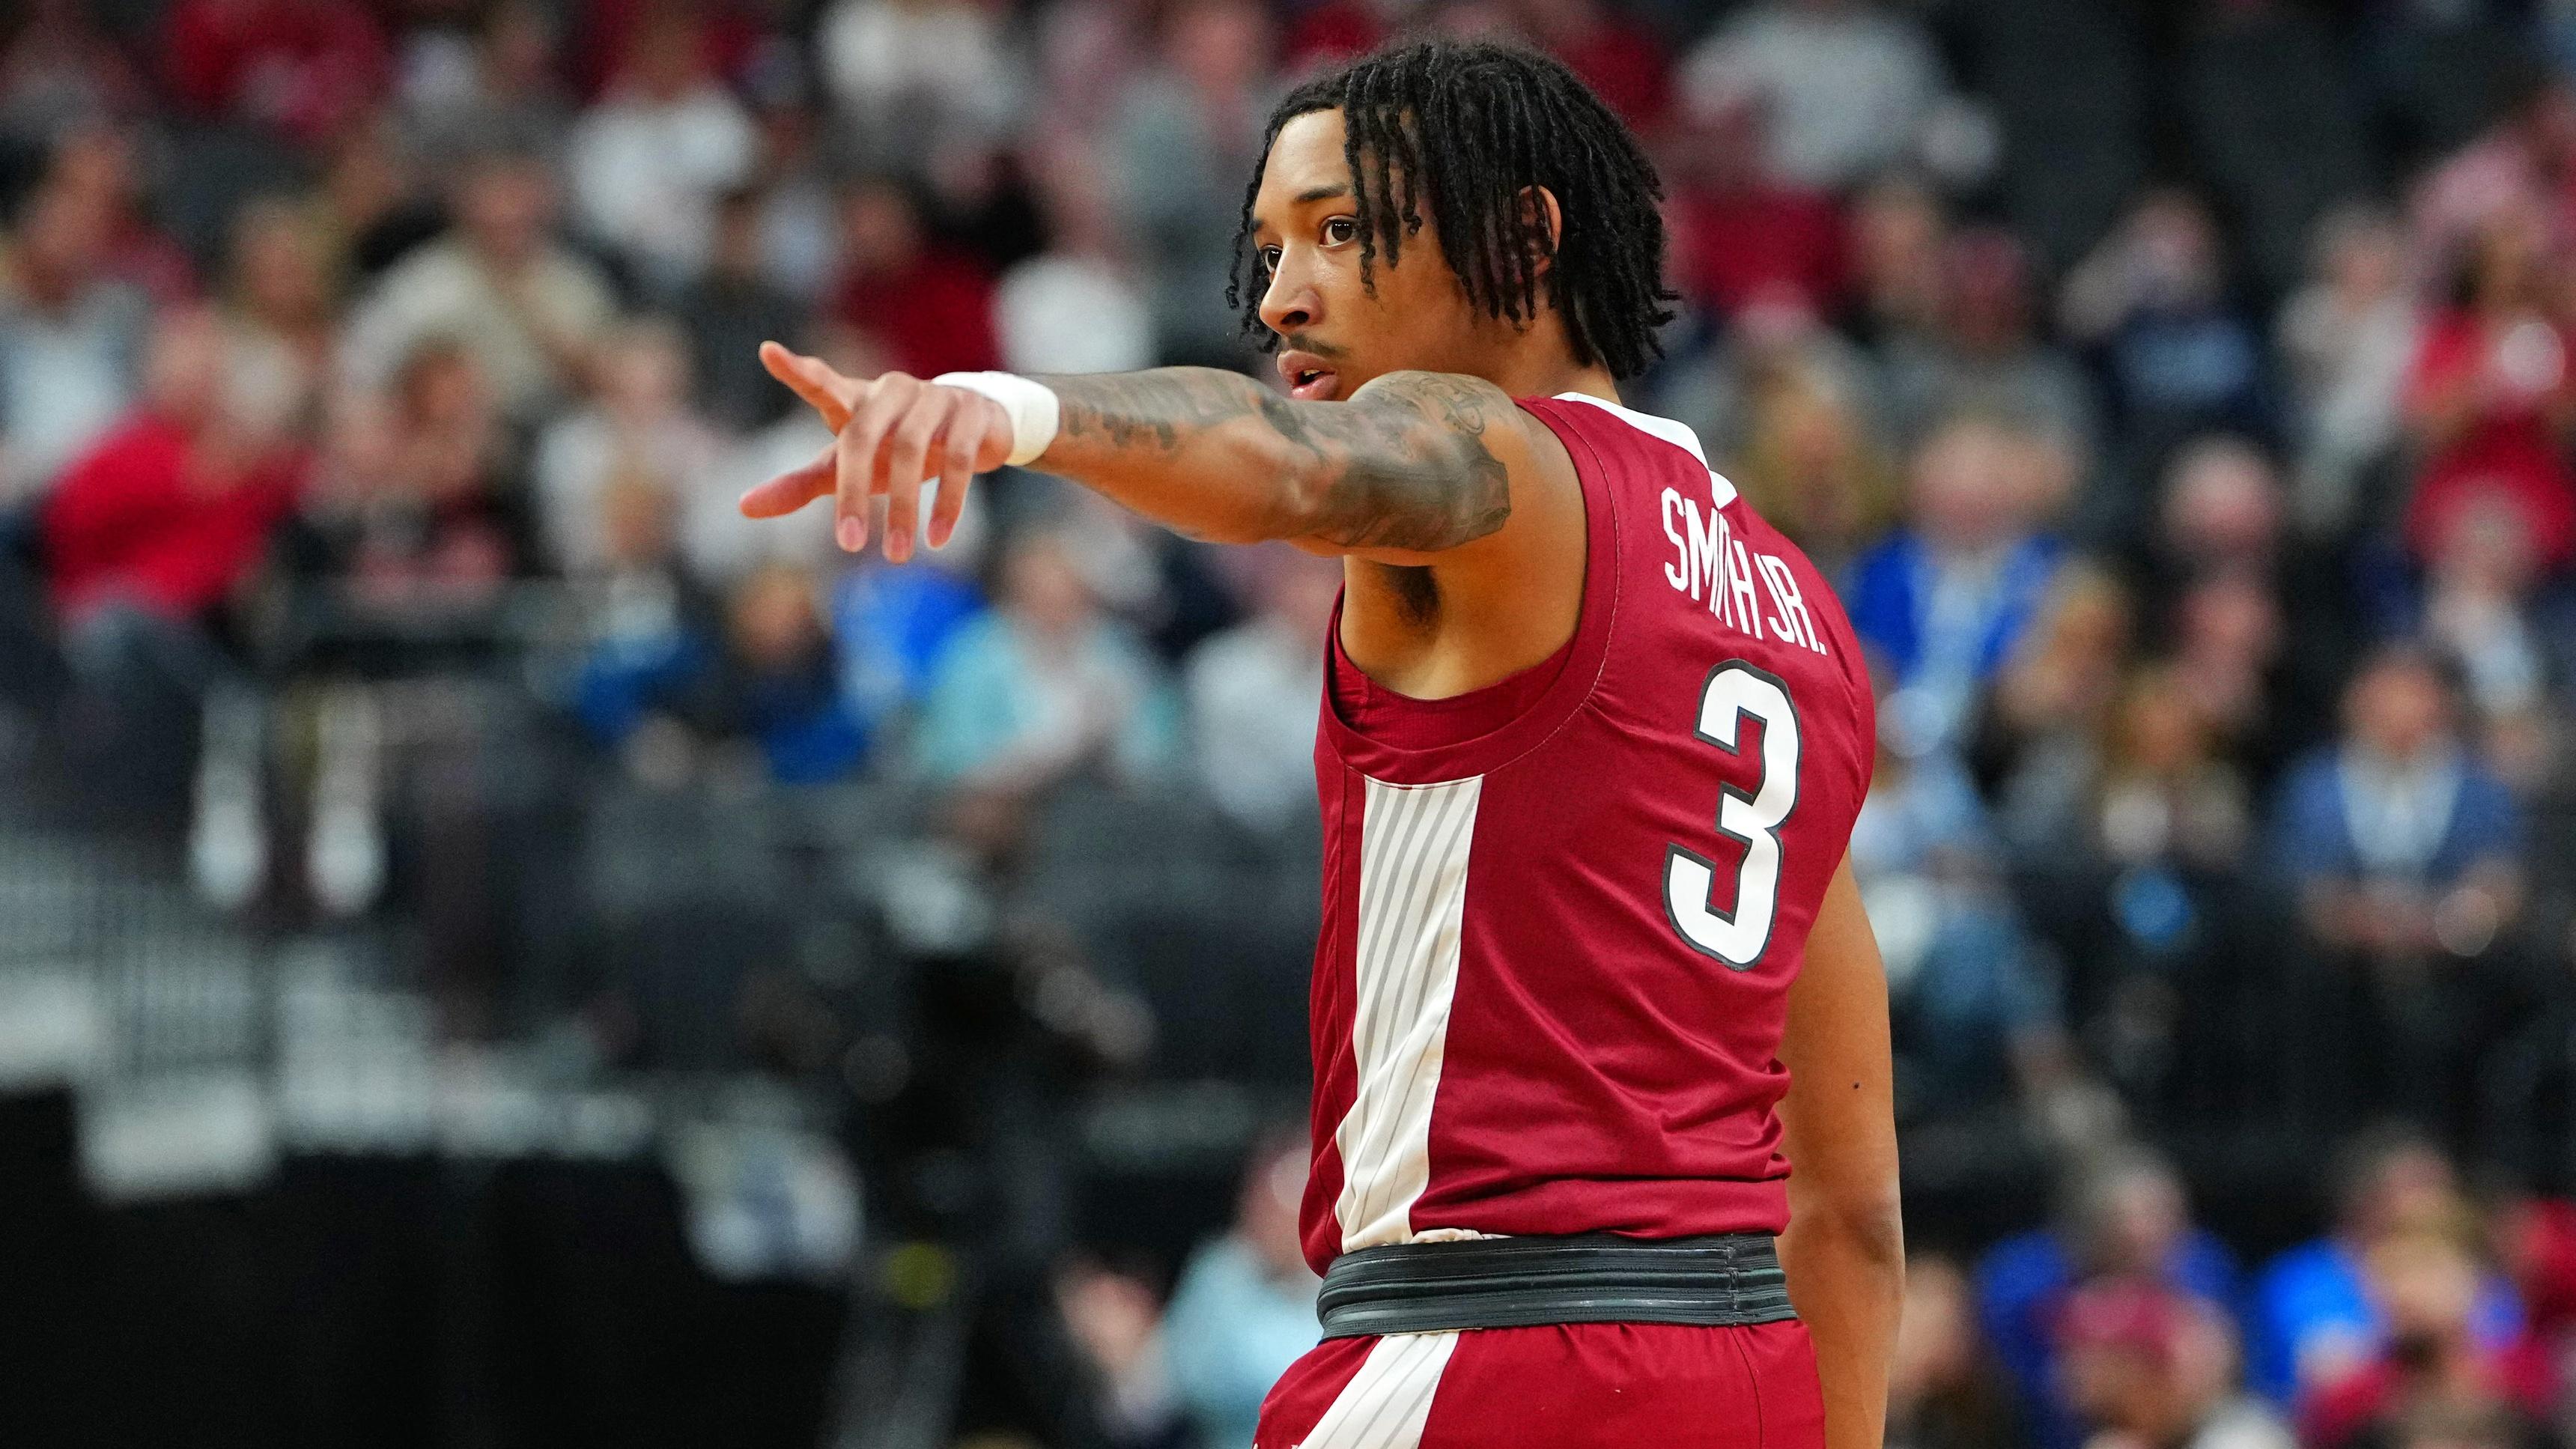 Arkansas Razorbacks guard Nick Smith Jr. (3) gestures against the UConn Huskies during the first half at T-Mobile Arena / Stephen R. Sylvanie - USA TODAY Sports